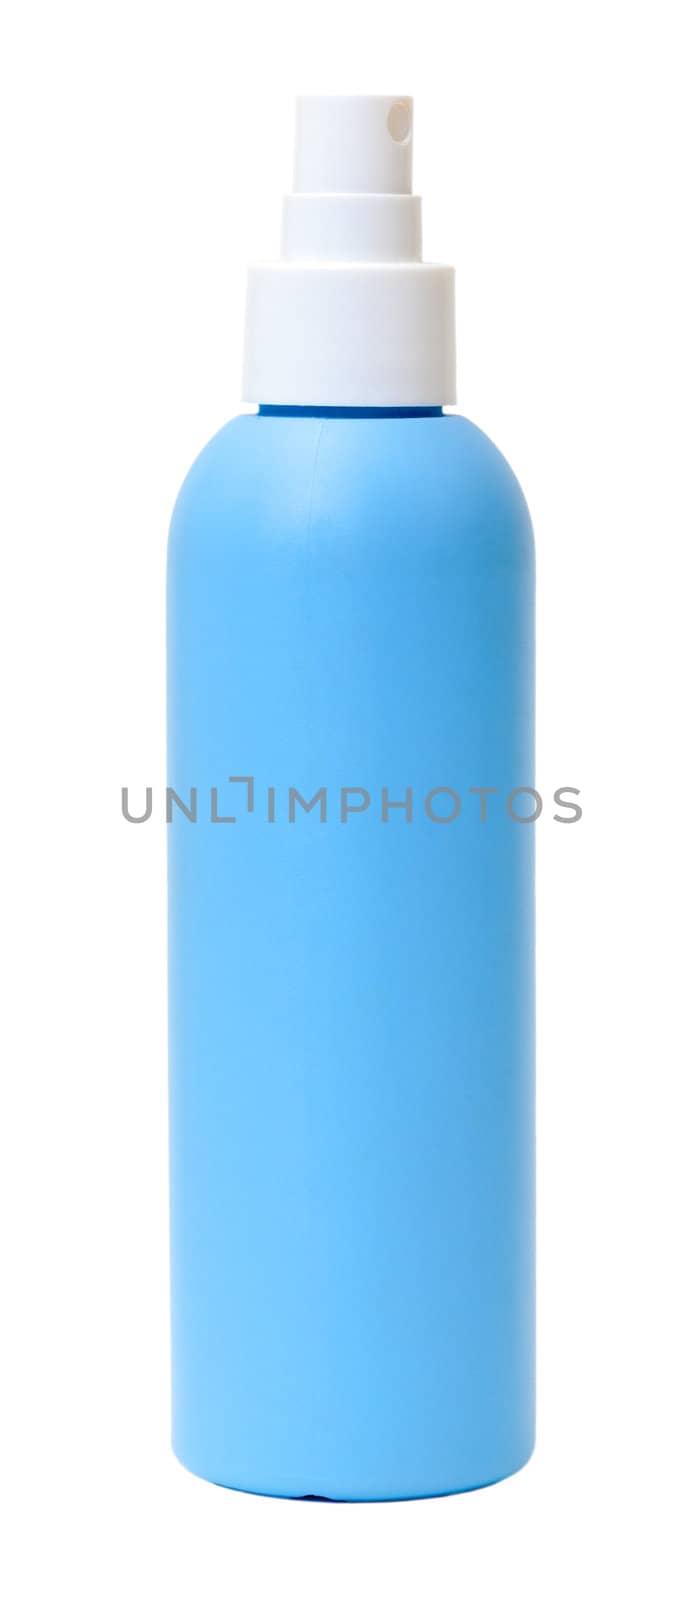 Blue Plastic Bottle with Spray, isolated on white